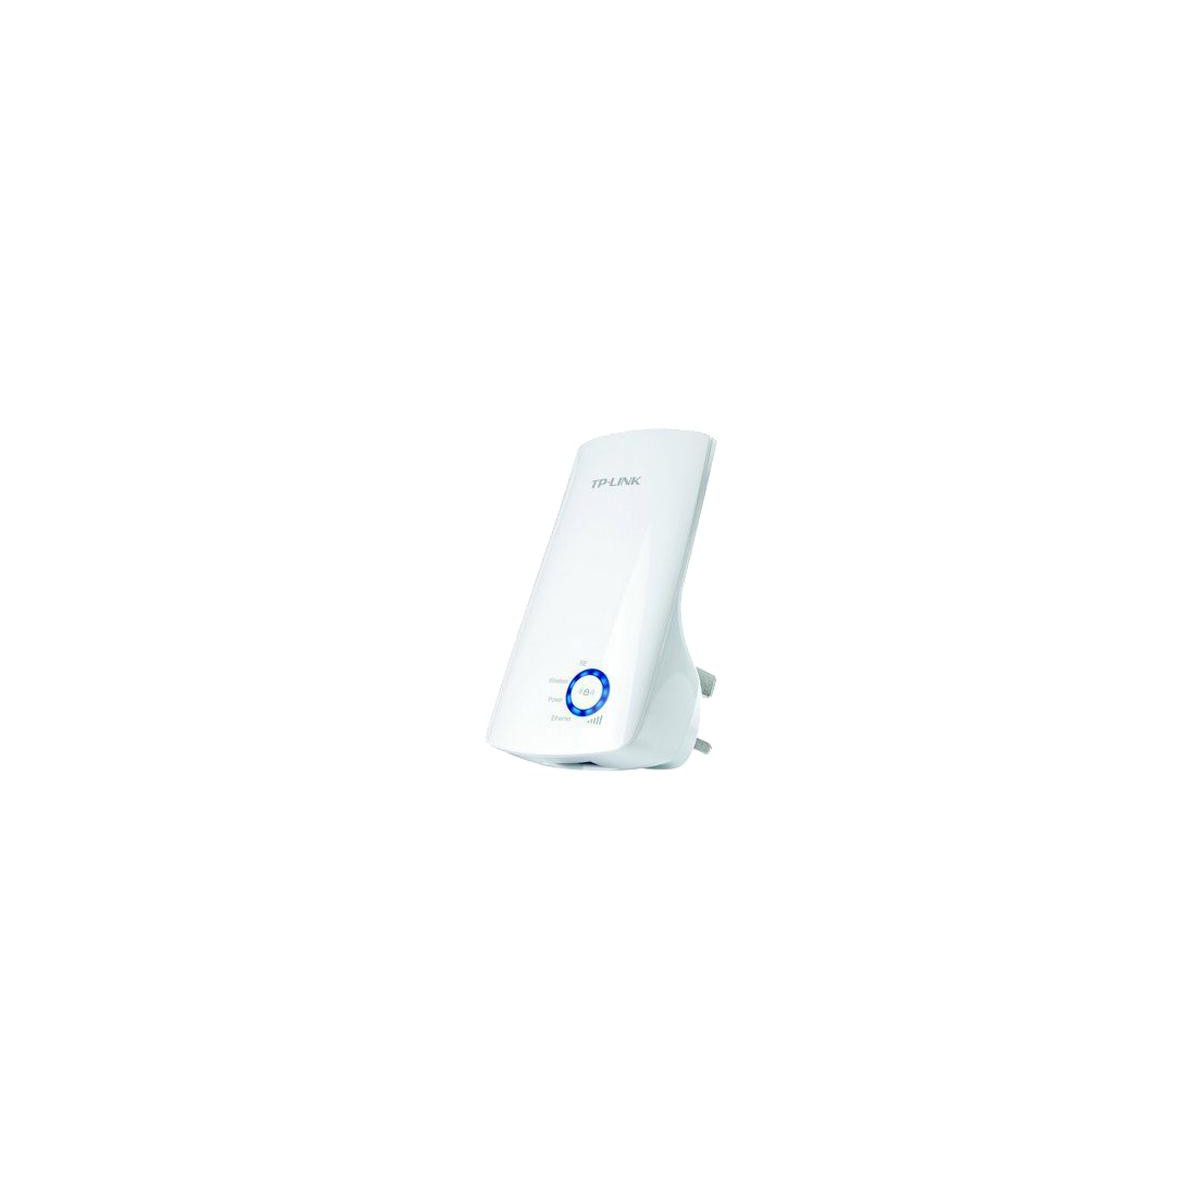 More about Repeater TP-LINK TL-WA850RE